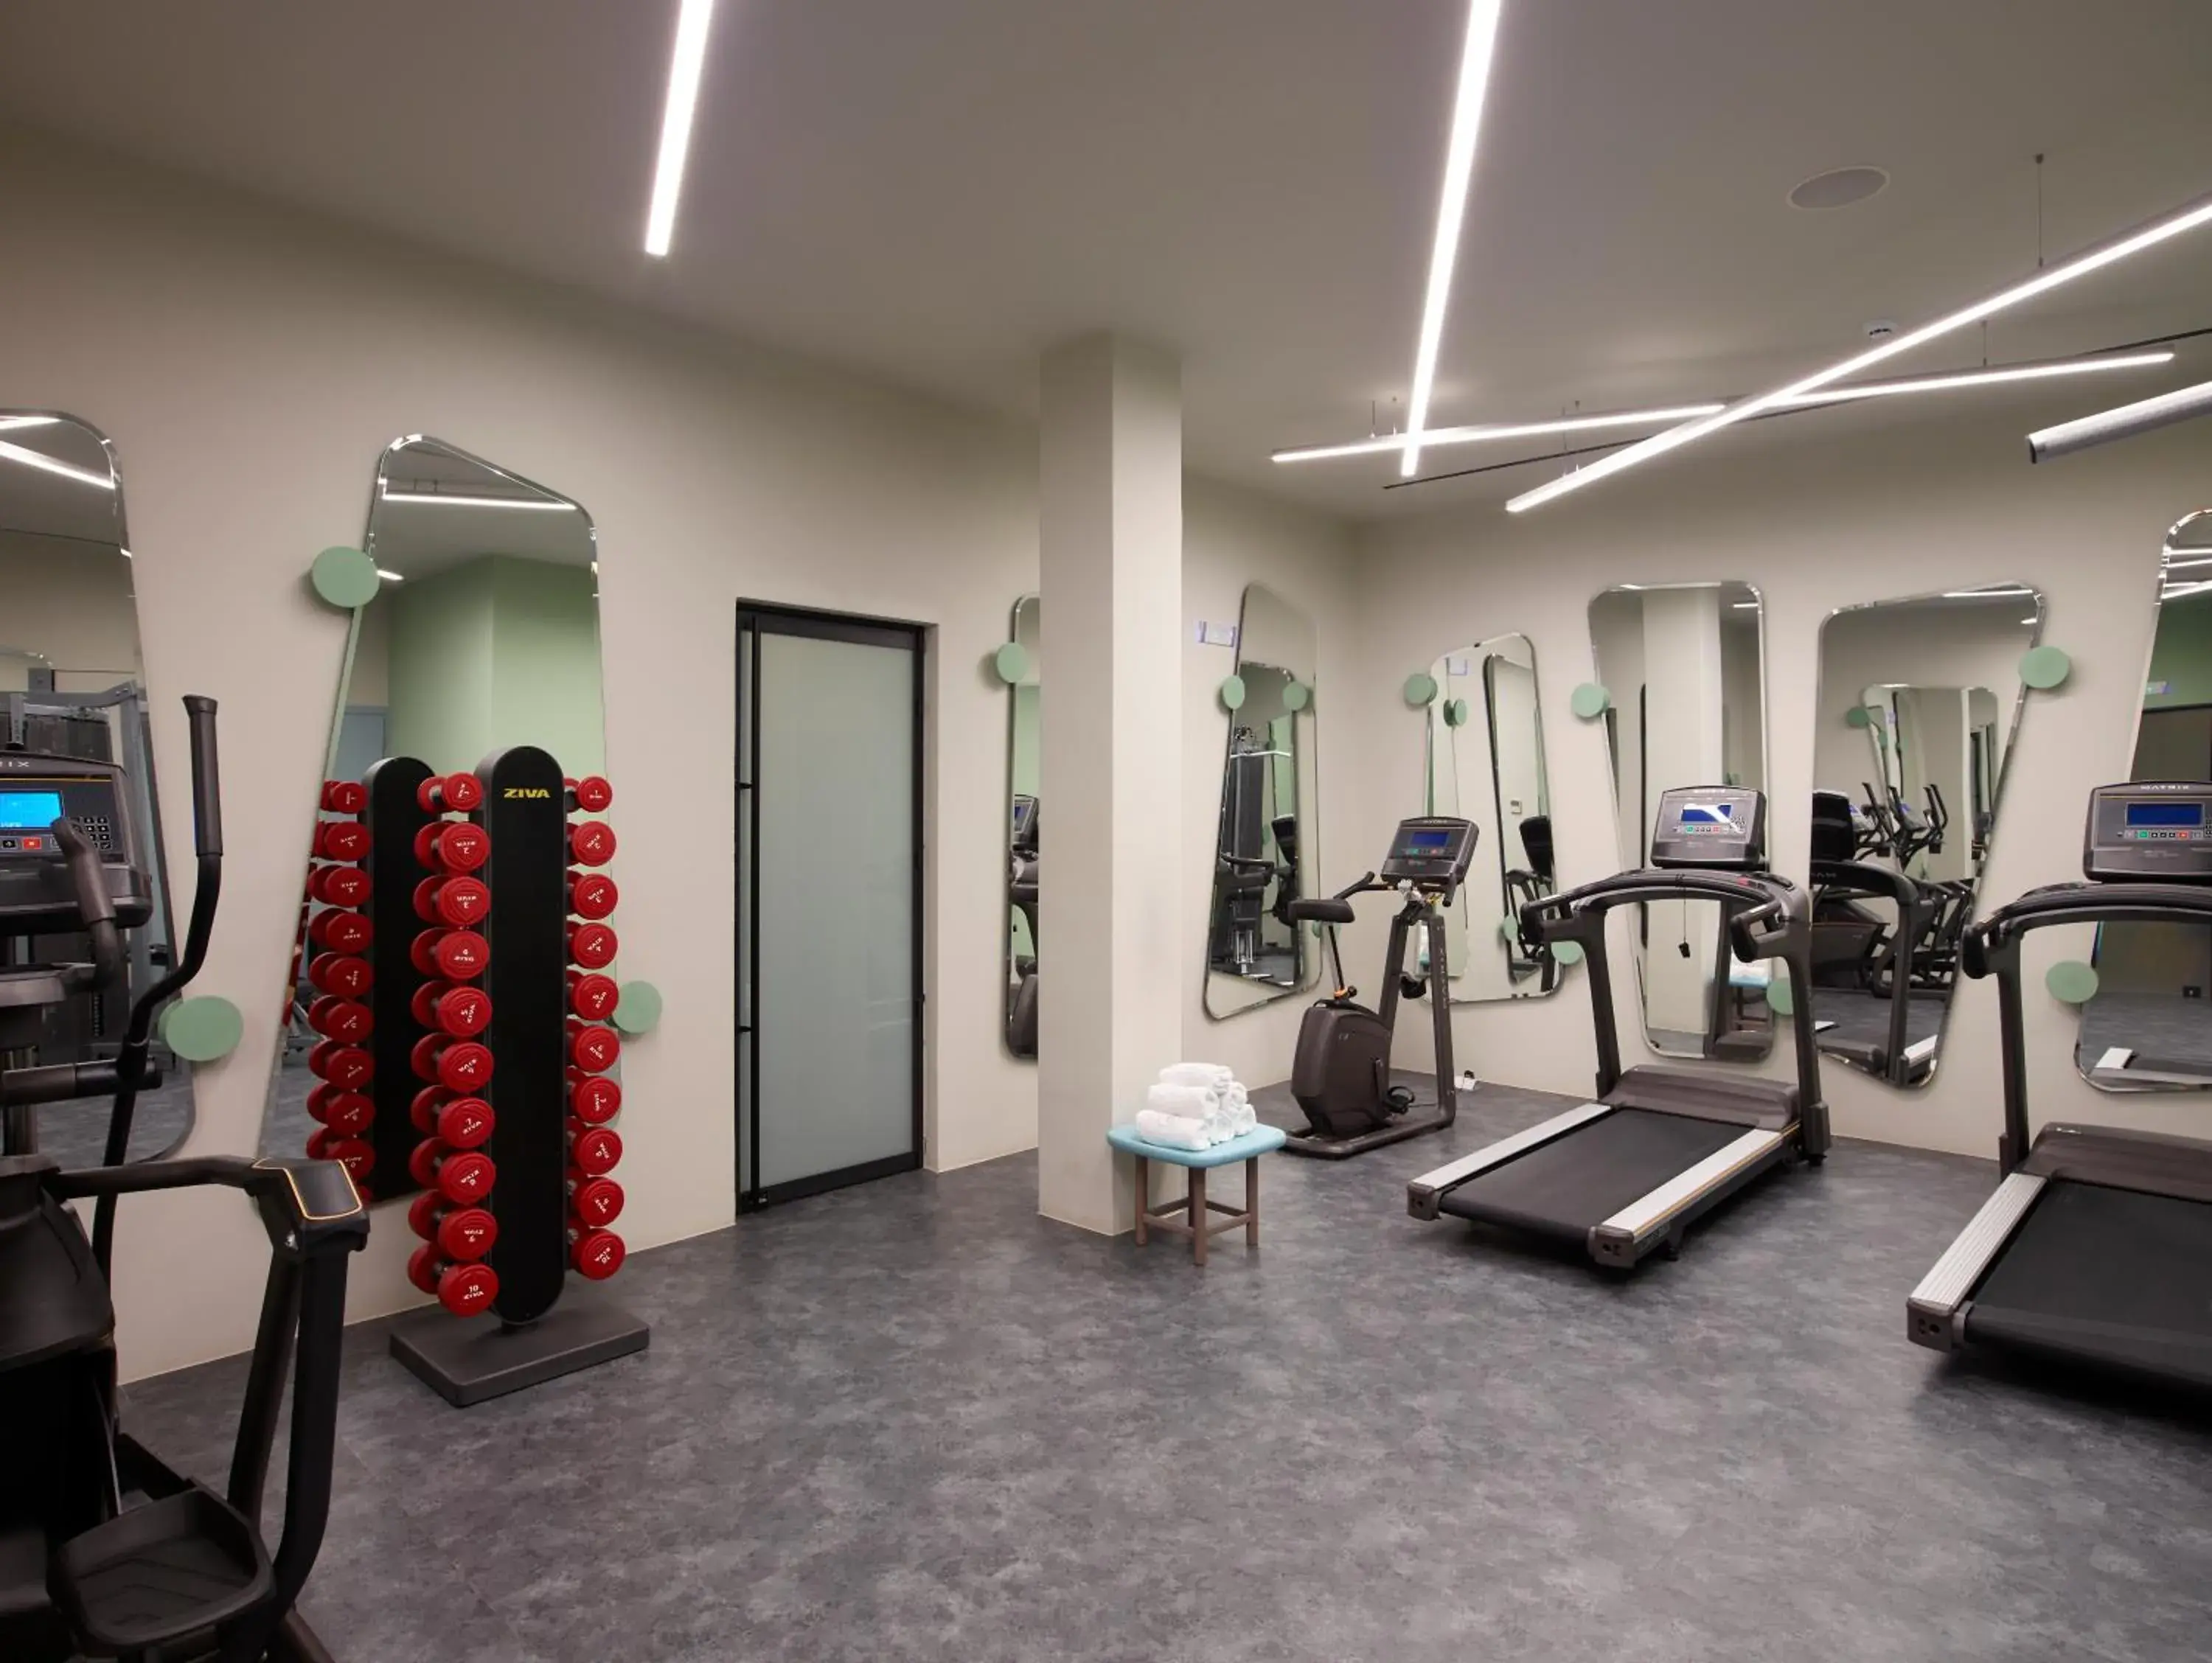 Fitness centre/facilities, Fitness Center/Facilities in Cayo Exclusive Resort & Spa